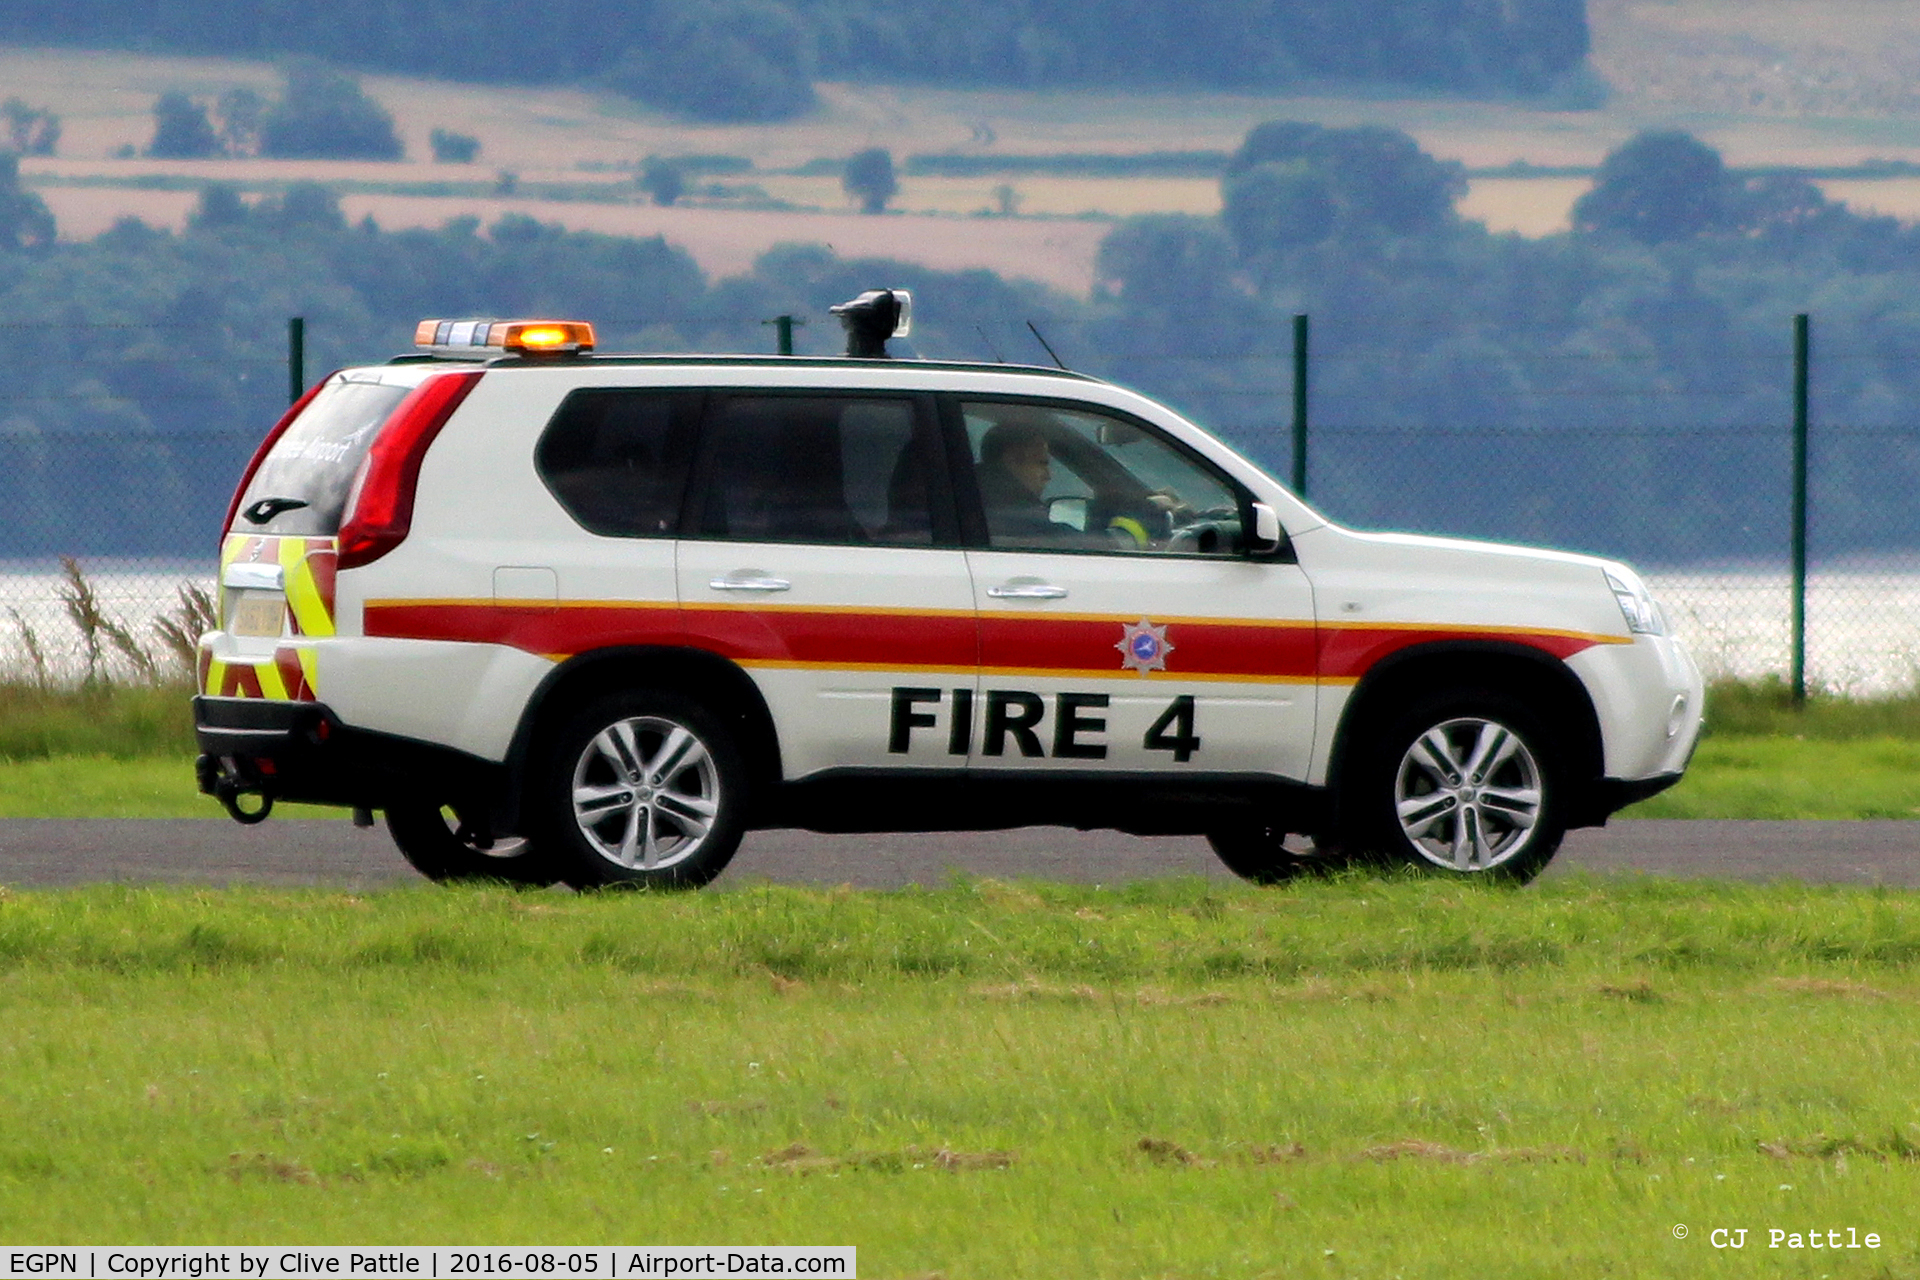 Dundee Airport, Dundee, Scotland United Kingdom (EGPN) - Fire 4 on patrol at Dundee Riverside EGPN